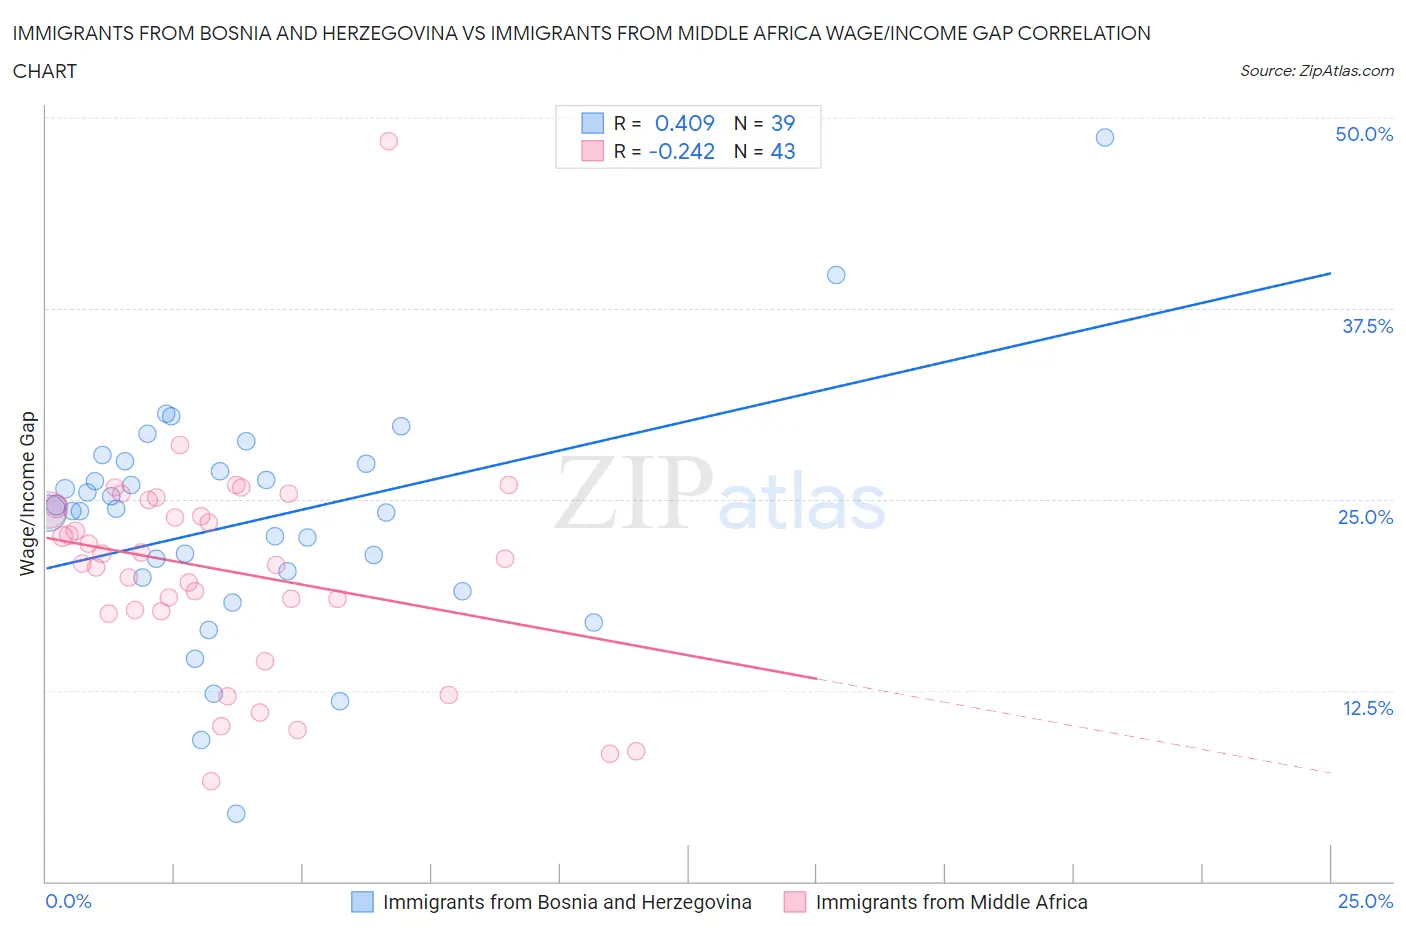 Immigrants from Bosnia and Herzegovina vs Immigrants from Middle Africa Wage/Income Gap